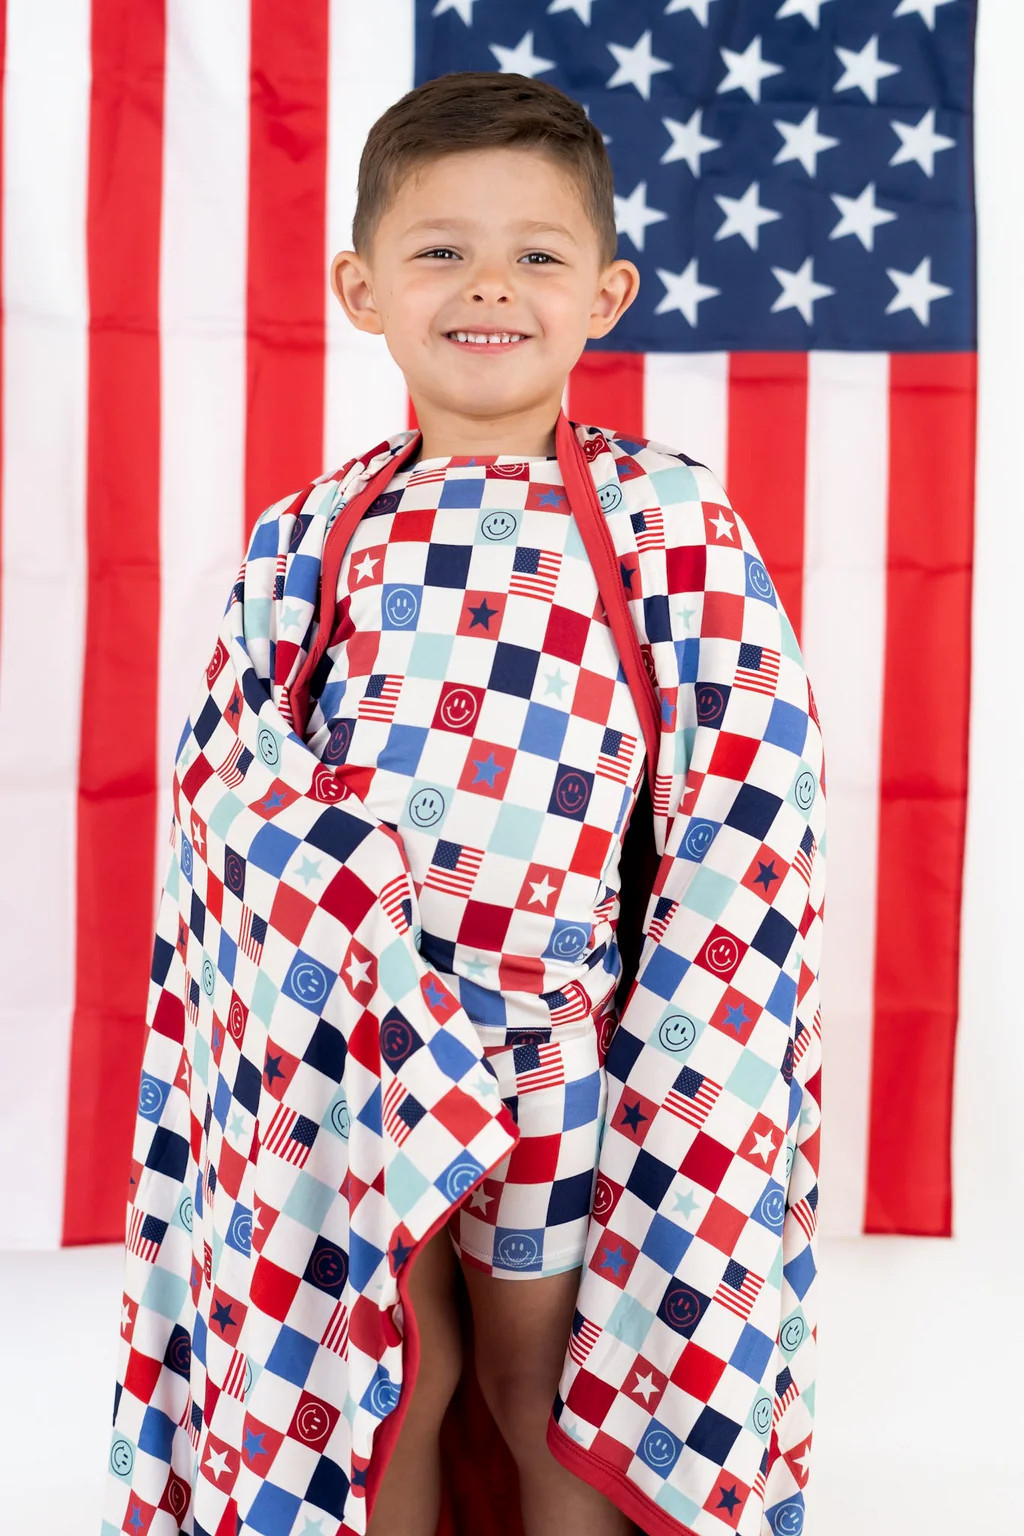 HOME OF THE FREE CHECKERS DREAM BLANKET | DREAM BIG LITTLE CO